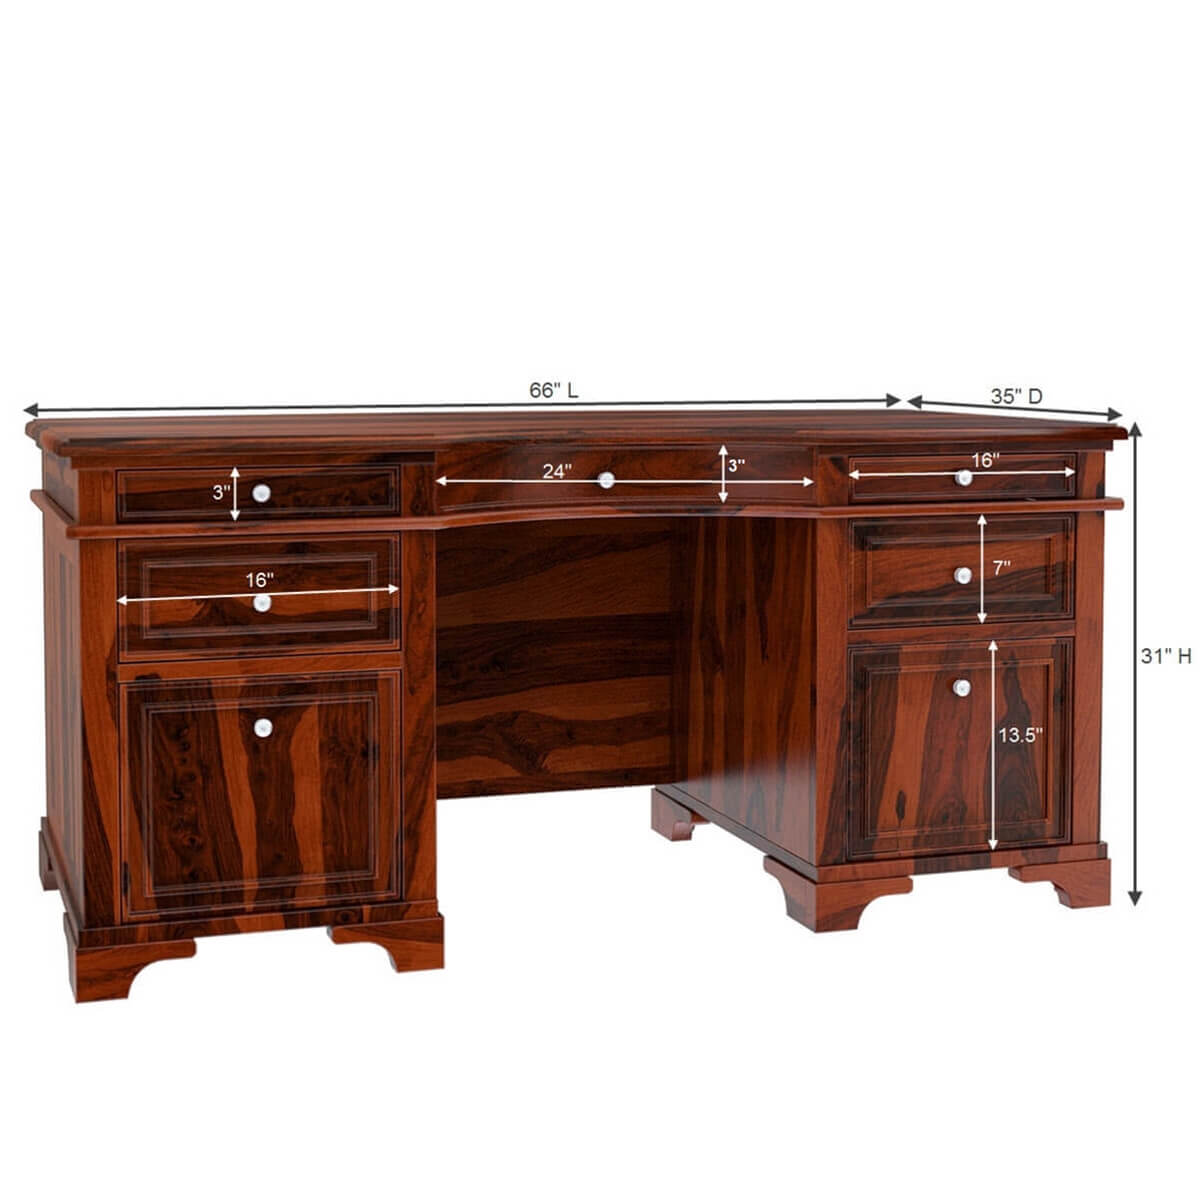 https://www.sierralivingconcepts.com/images/thumbs/0398190_victorian-style-rustic-66-inch-solid-wood-home-office-executive-desk.jpeg